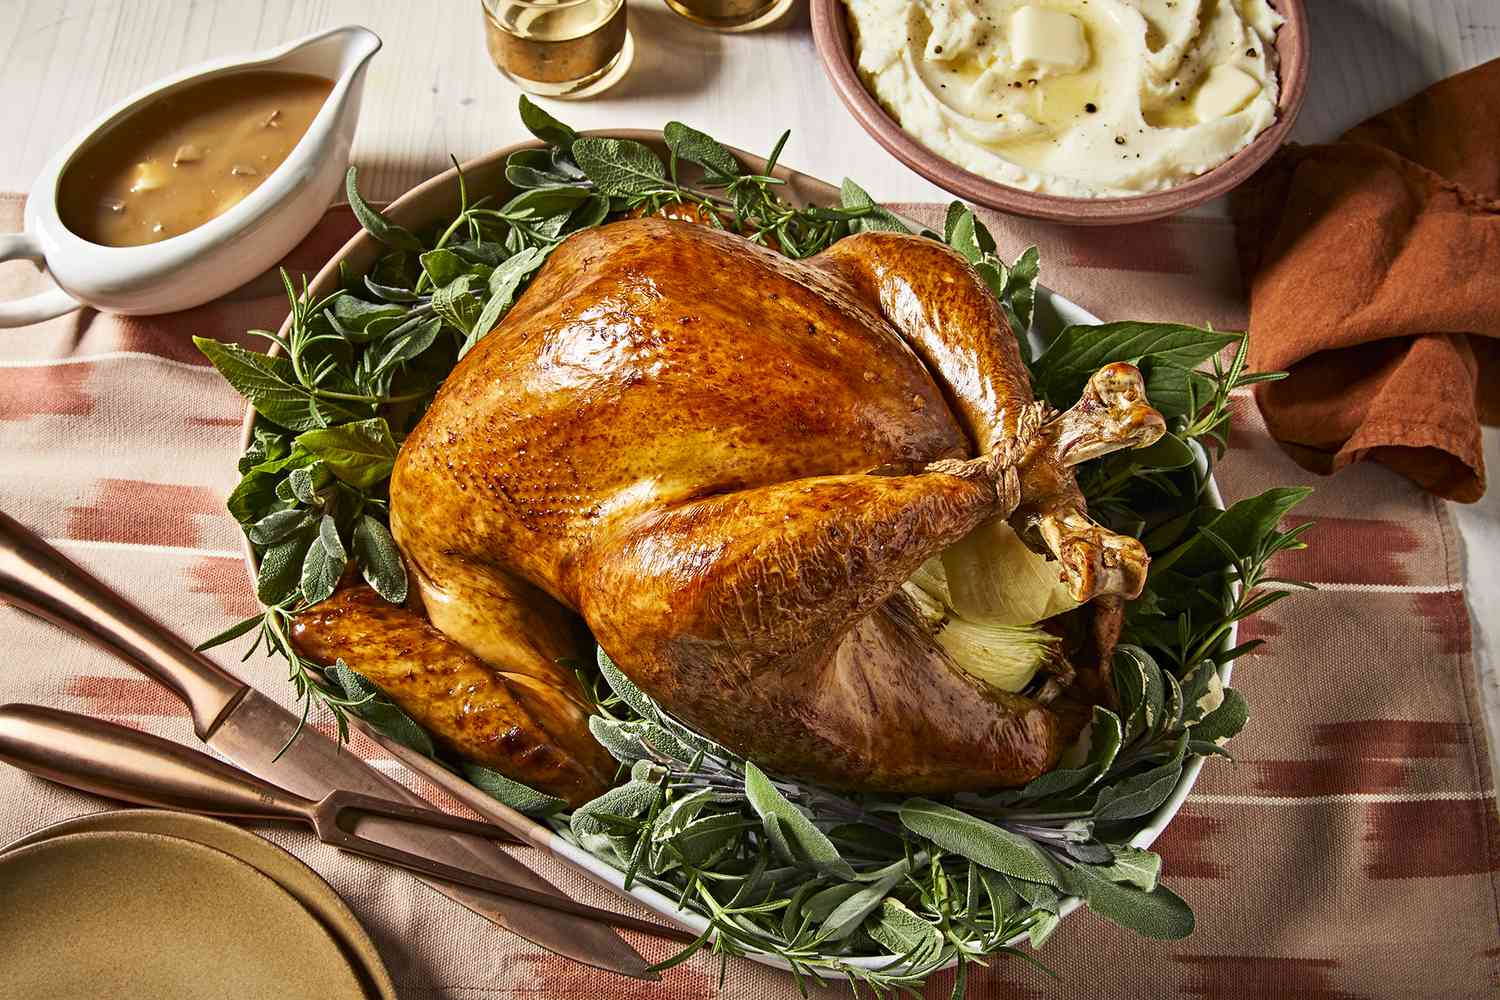 Overhead view of a perfectly roasted whole turkey served on a platter with lots of fresh herbs. The turkey is served alongside mashed potatoes and gravy